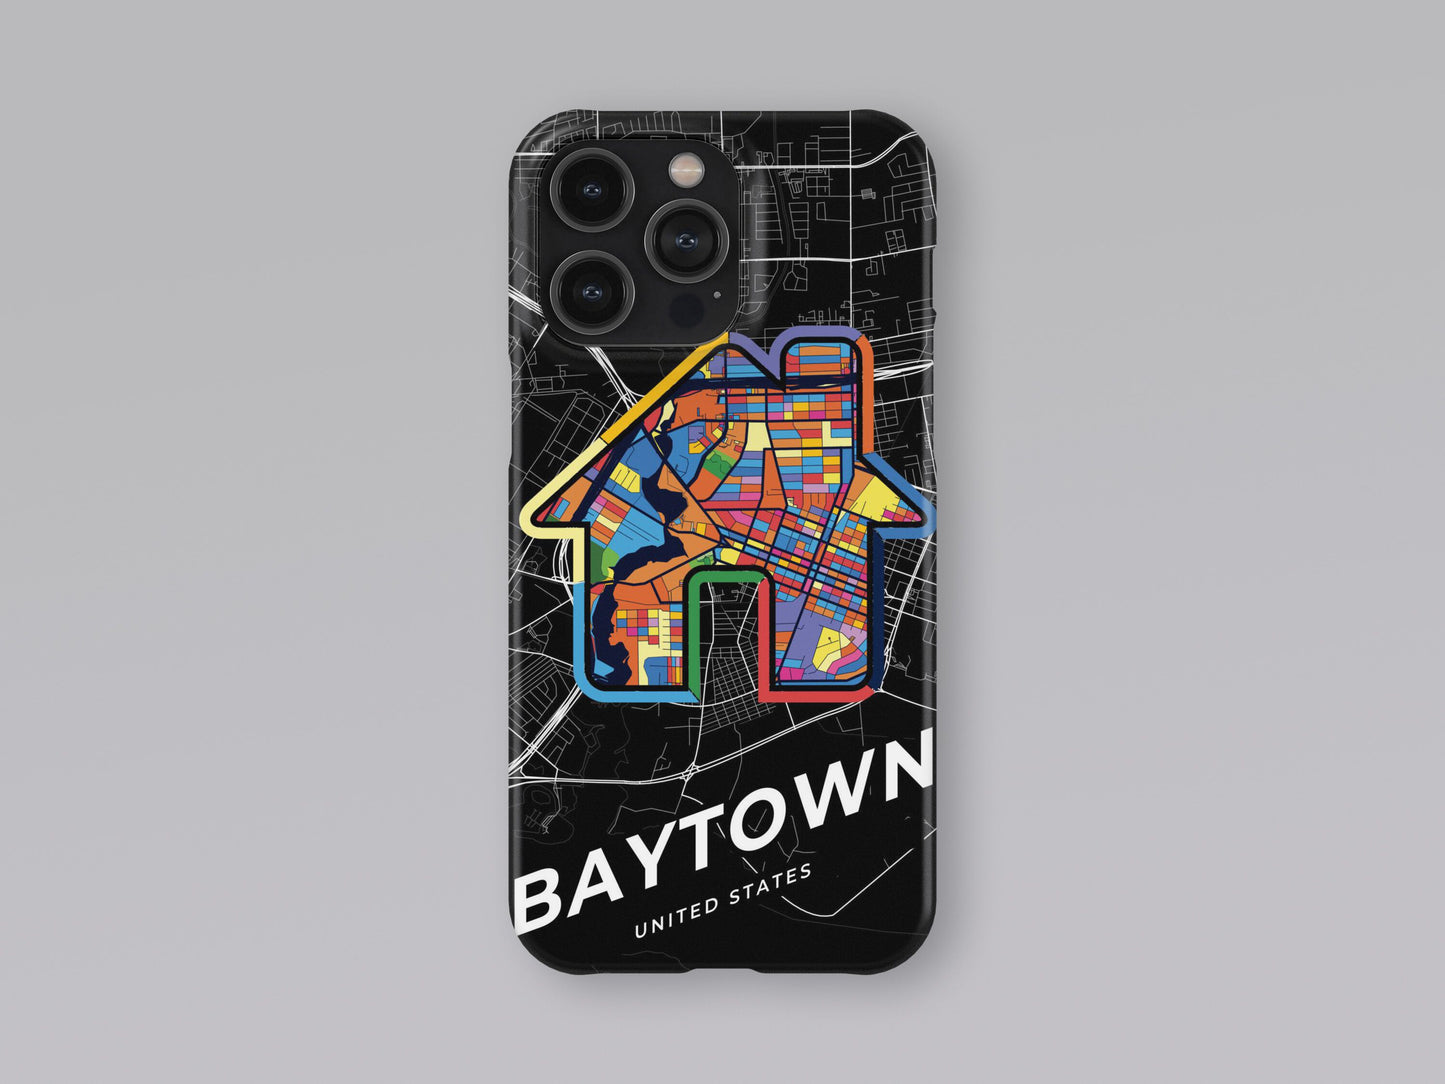 Baytown Texas slim phone case with colorful icon. Birthday, wedding or housewarming gift. Couple match cases. 3